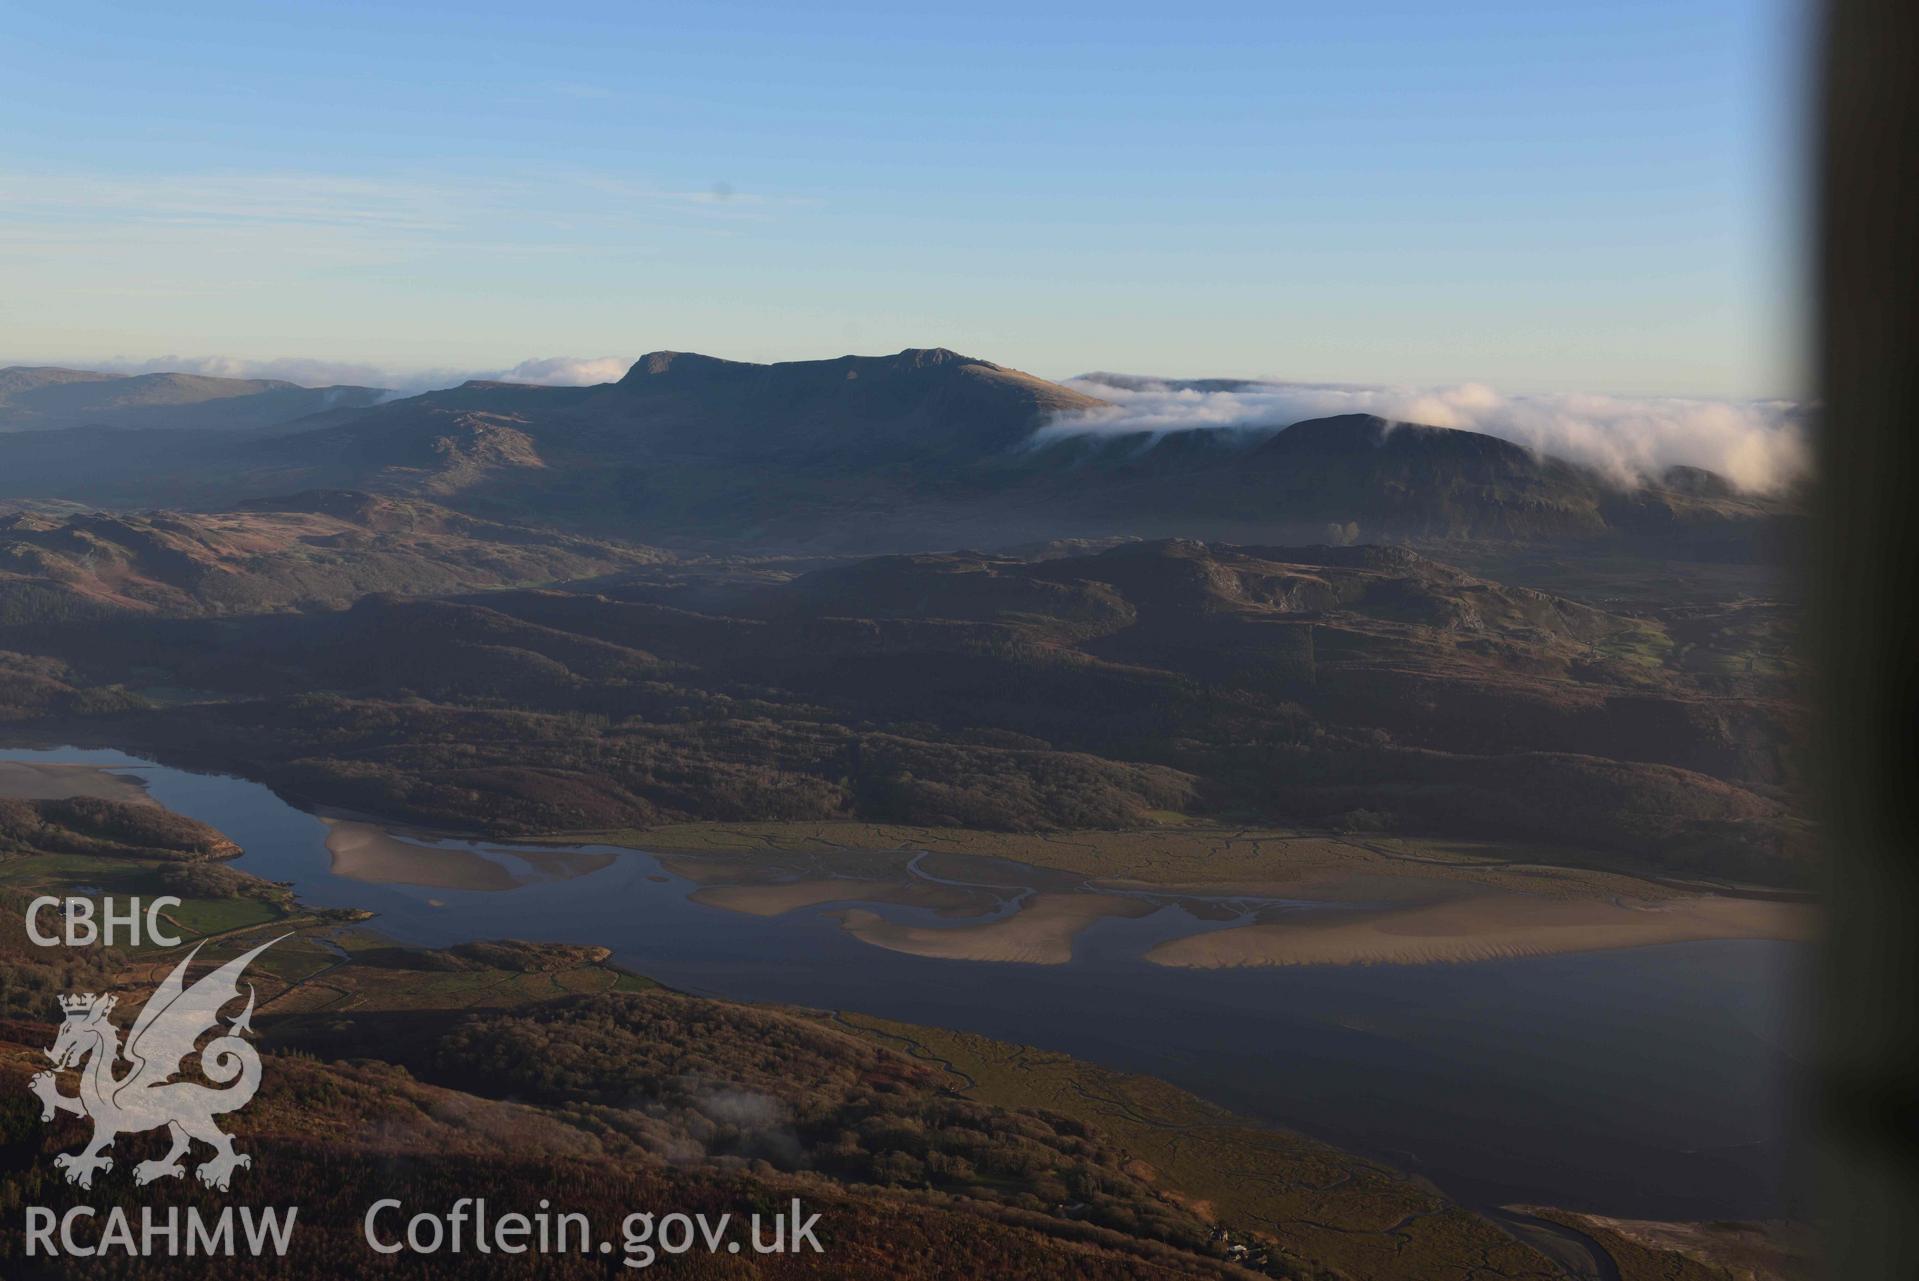 Oblique aerial photograph of Cader Idris, with cloud inversion, wide landscape from NW. Taken during the Royal Commission